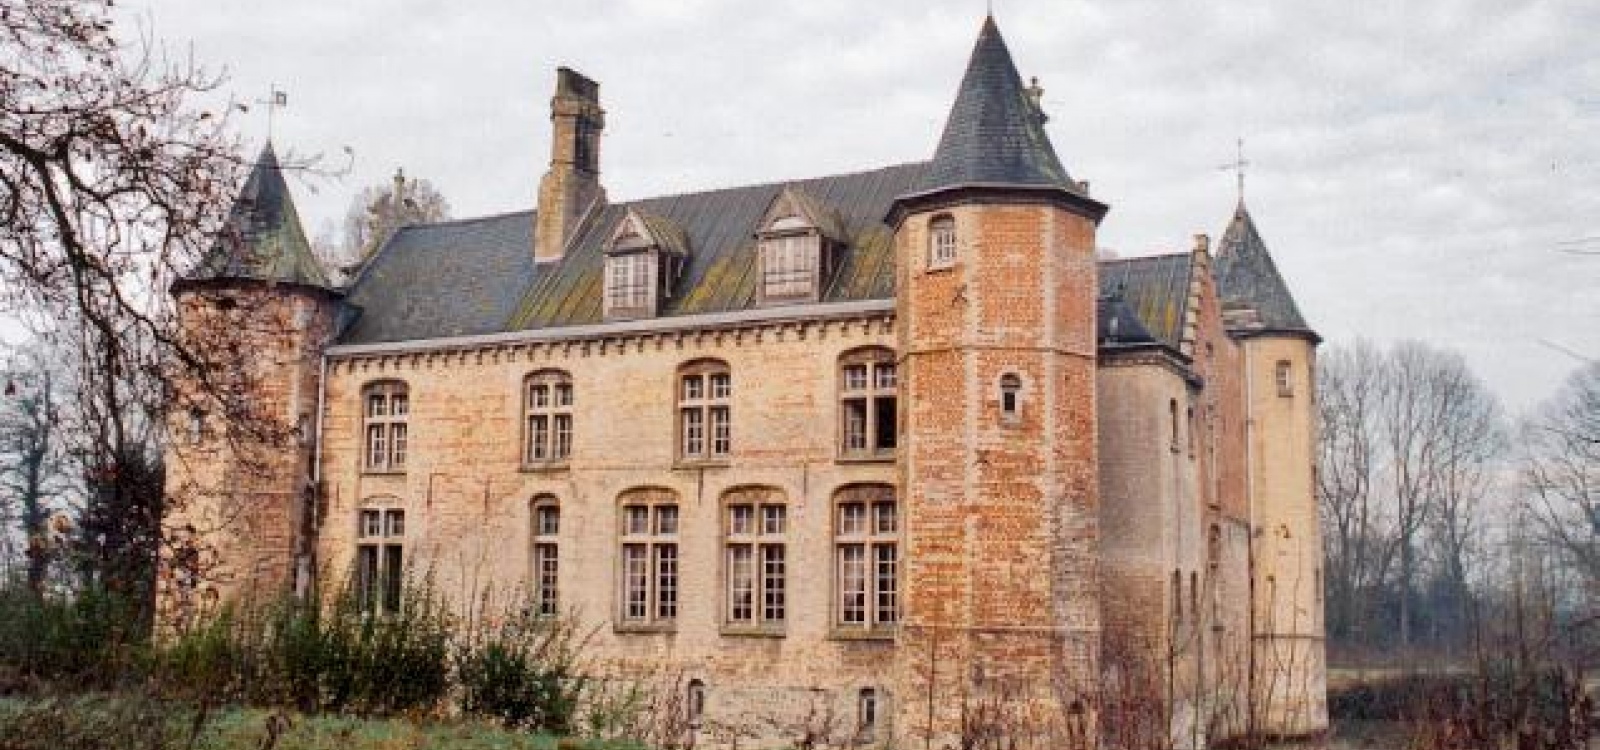 Dunkerque, Nord, France, ,Chateau,A vendre,1025